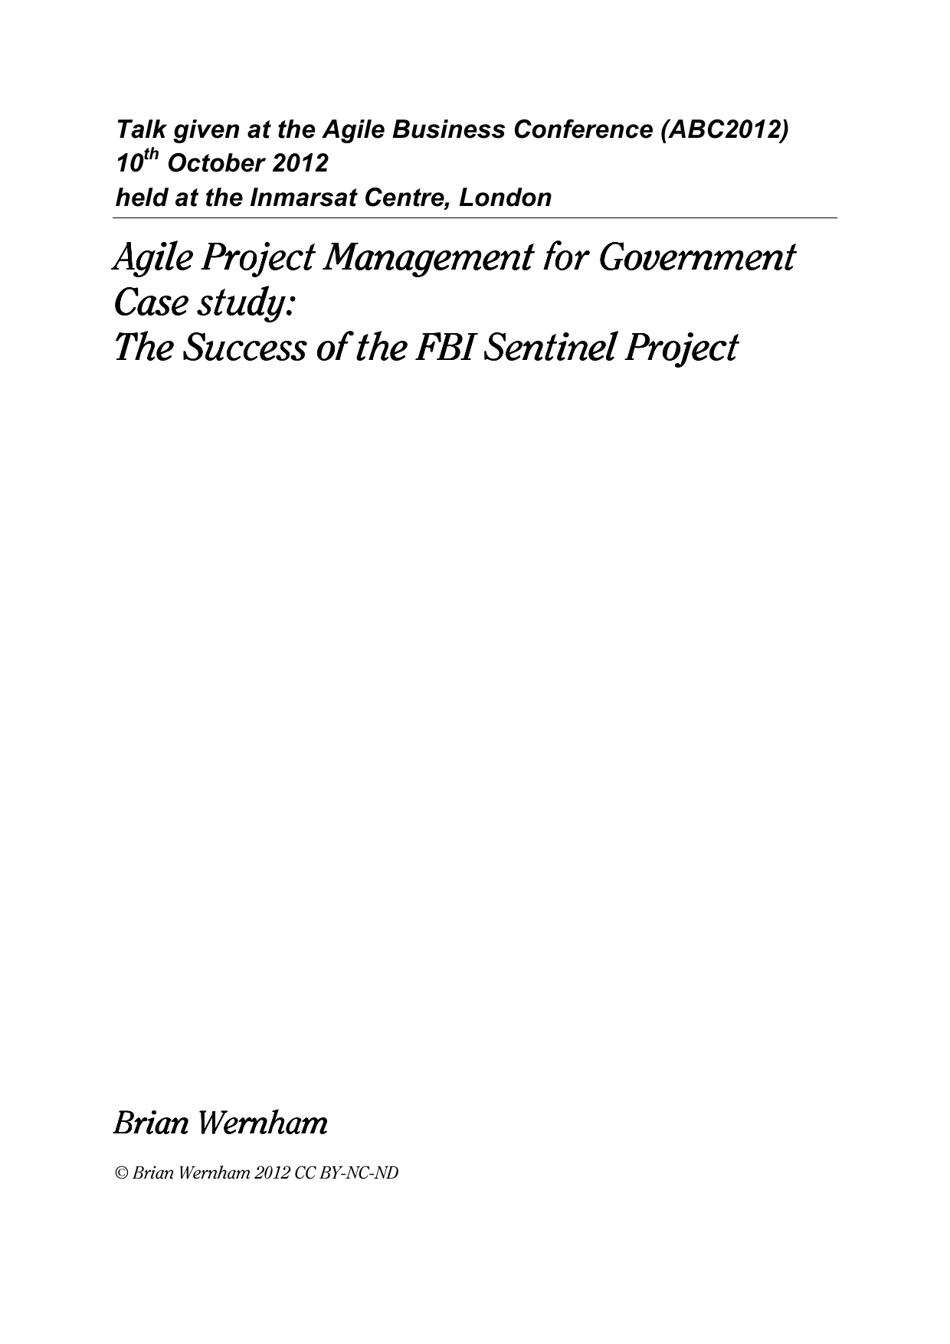 The Success of the FBI Sentinel Project